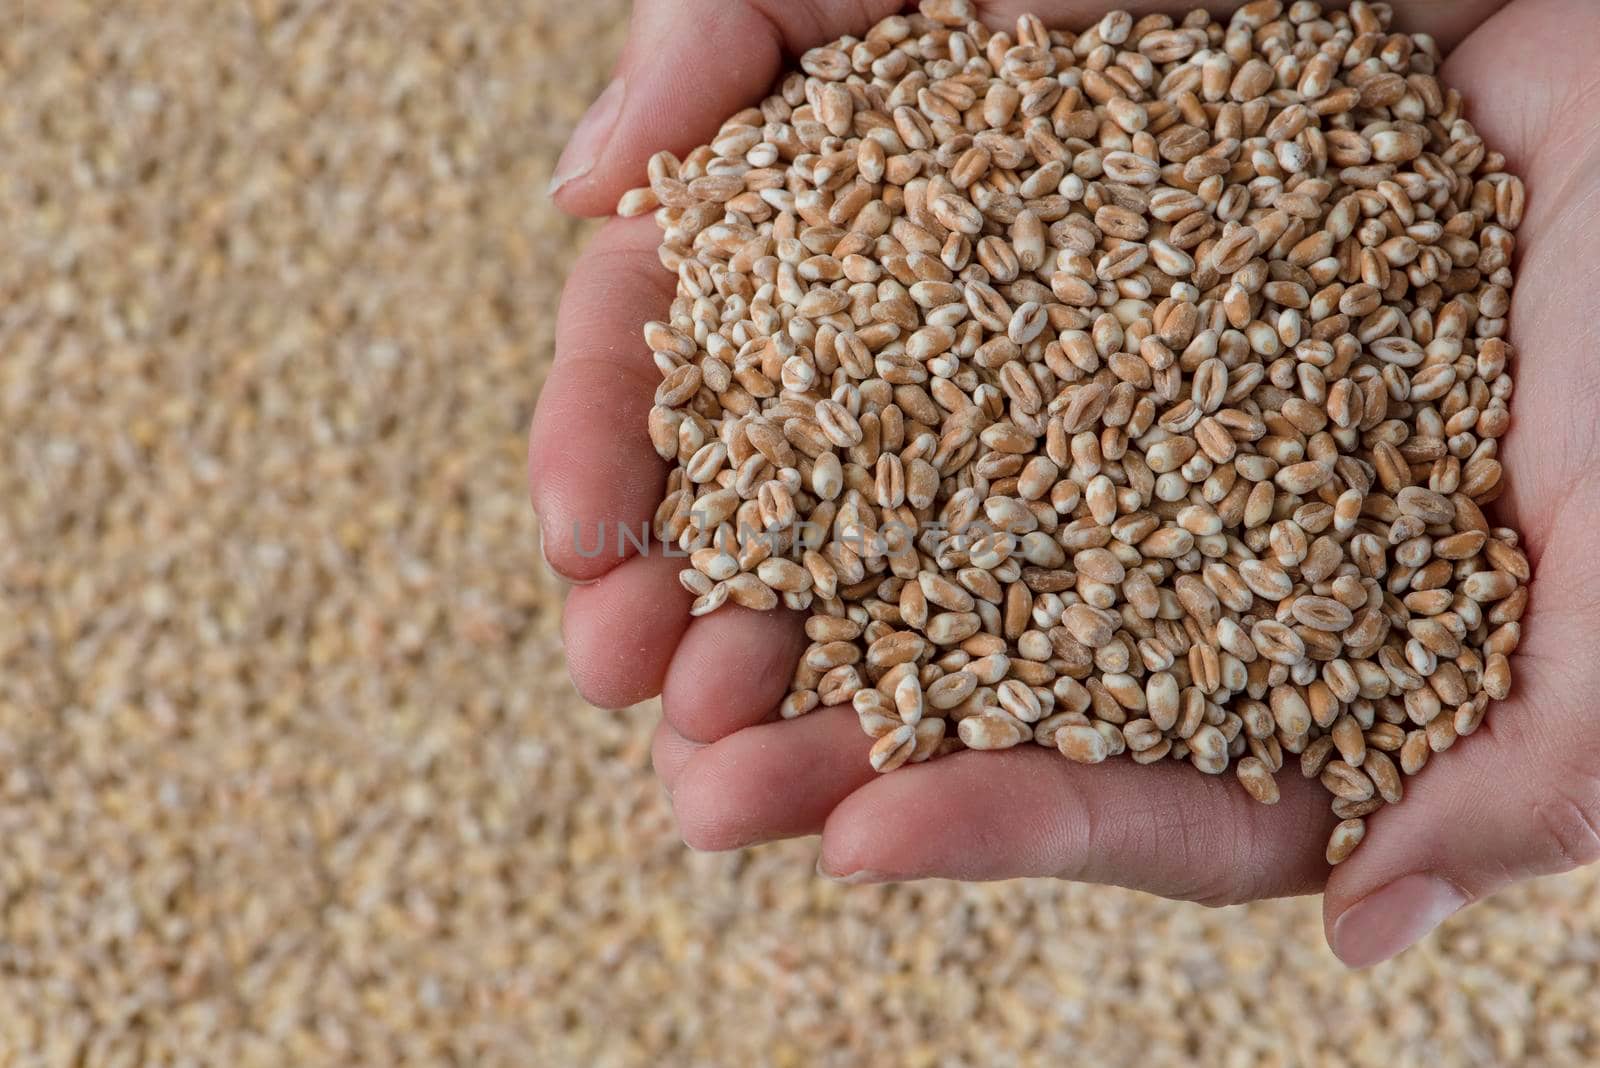 Wheat crisis, lack of grain and crops. Grains of wheat in the hand, against the background of the granary. The concept of the world food crisis. export and import. by SERSOL